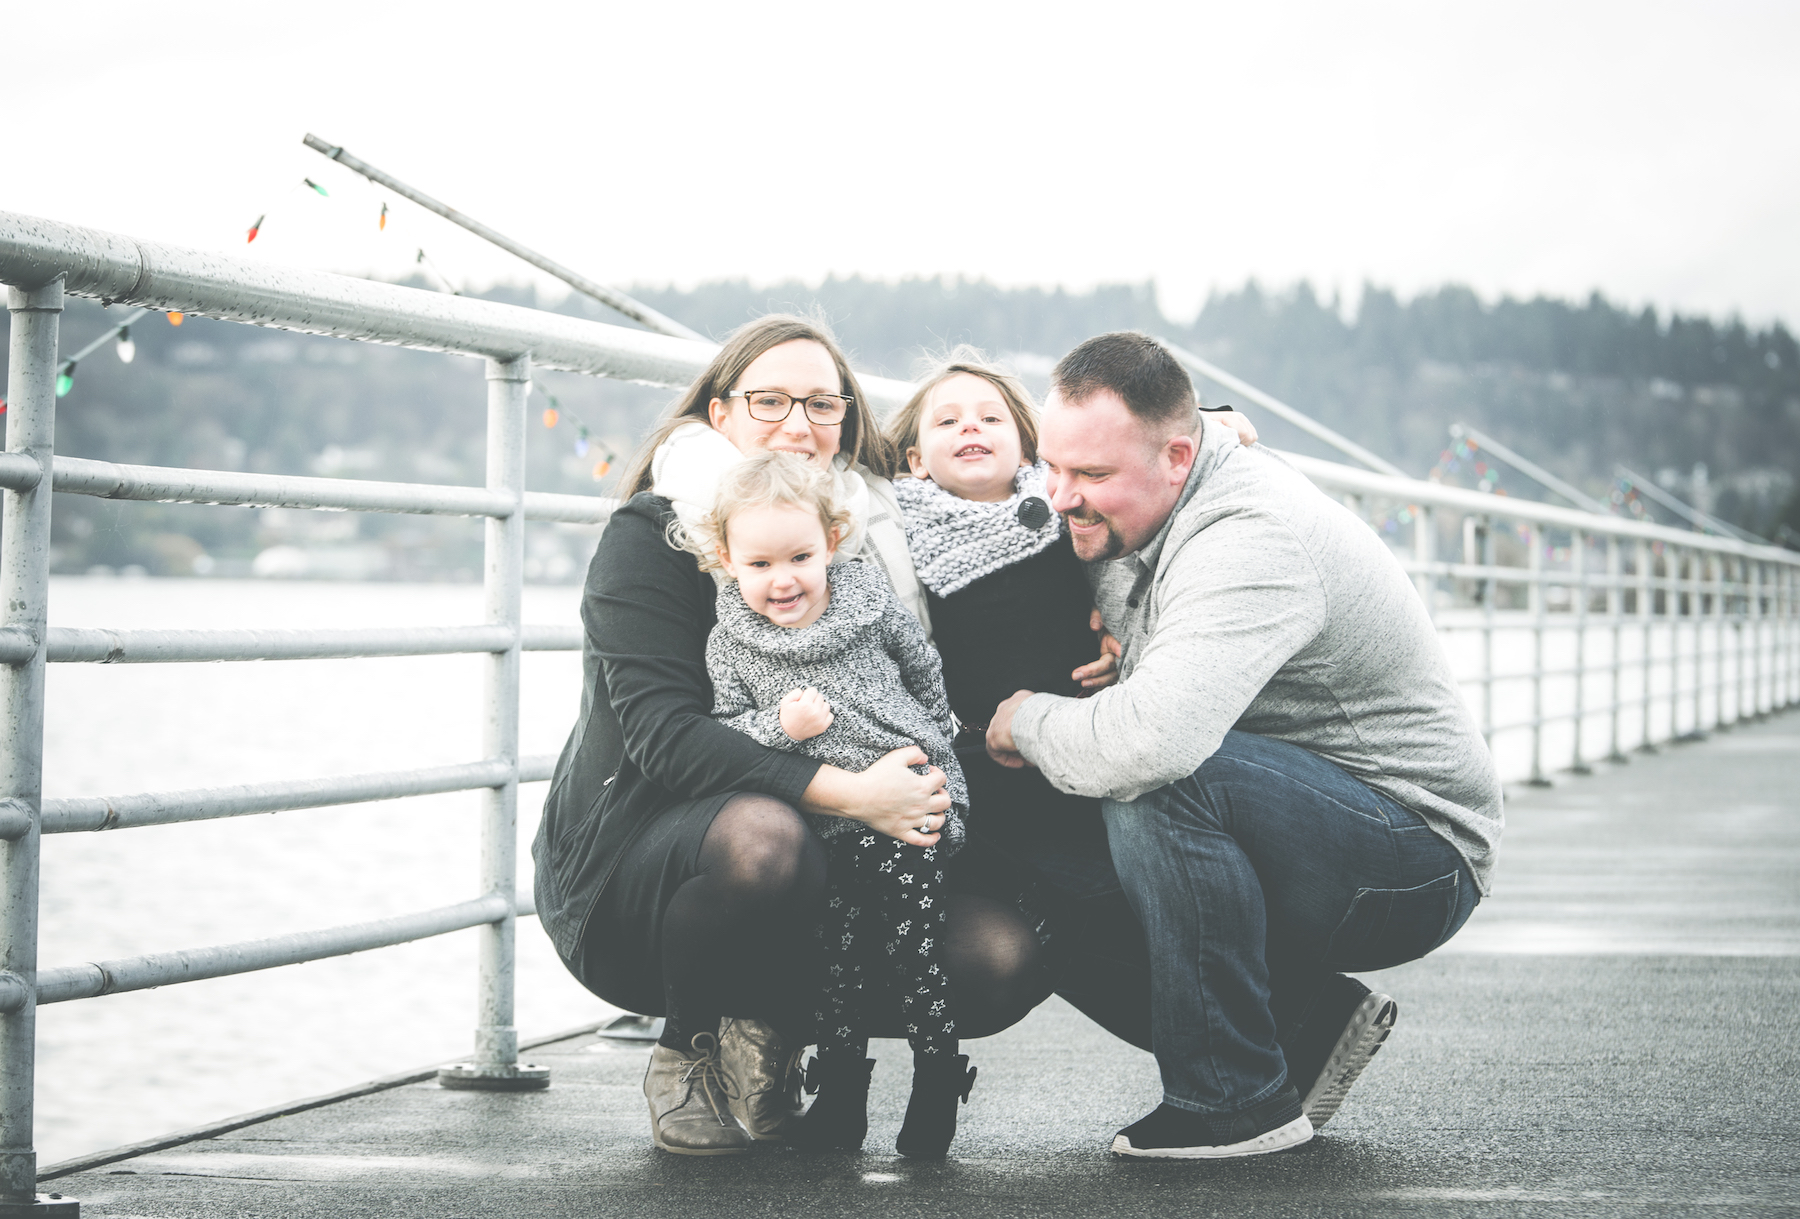 janes_photography_2016_renton_family_maternity_session_meghan_coulon_gene_20168611